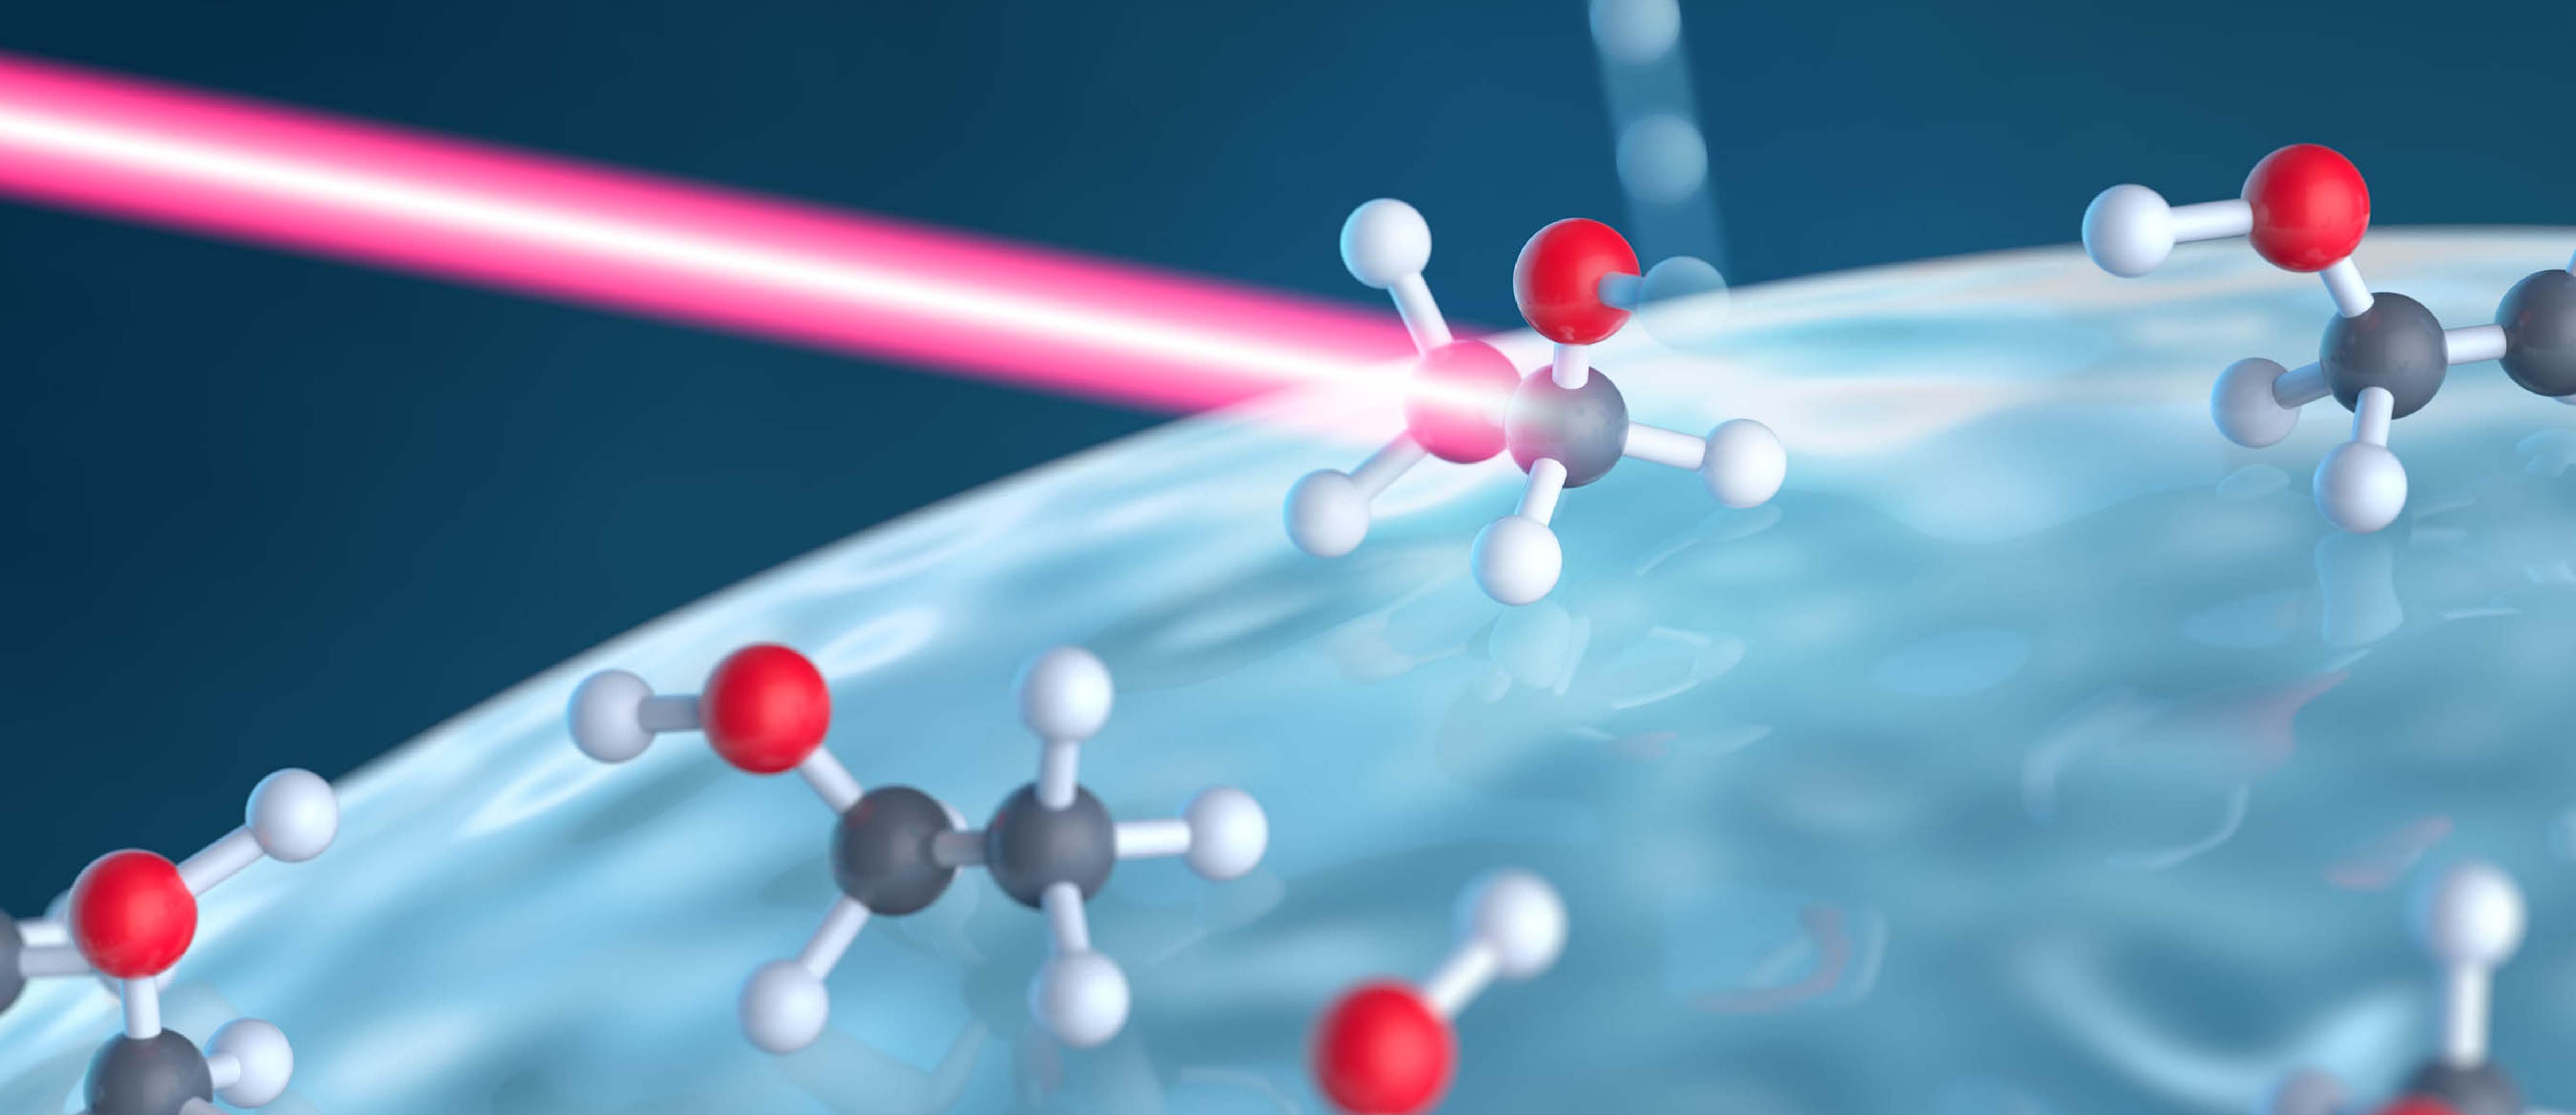 An Ultrafast Glimpse of the Photochemistry of the Atmosphere